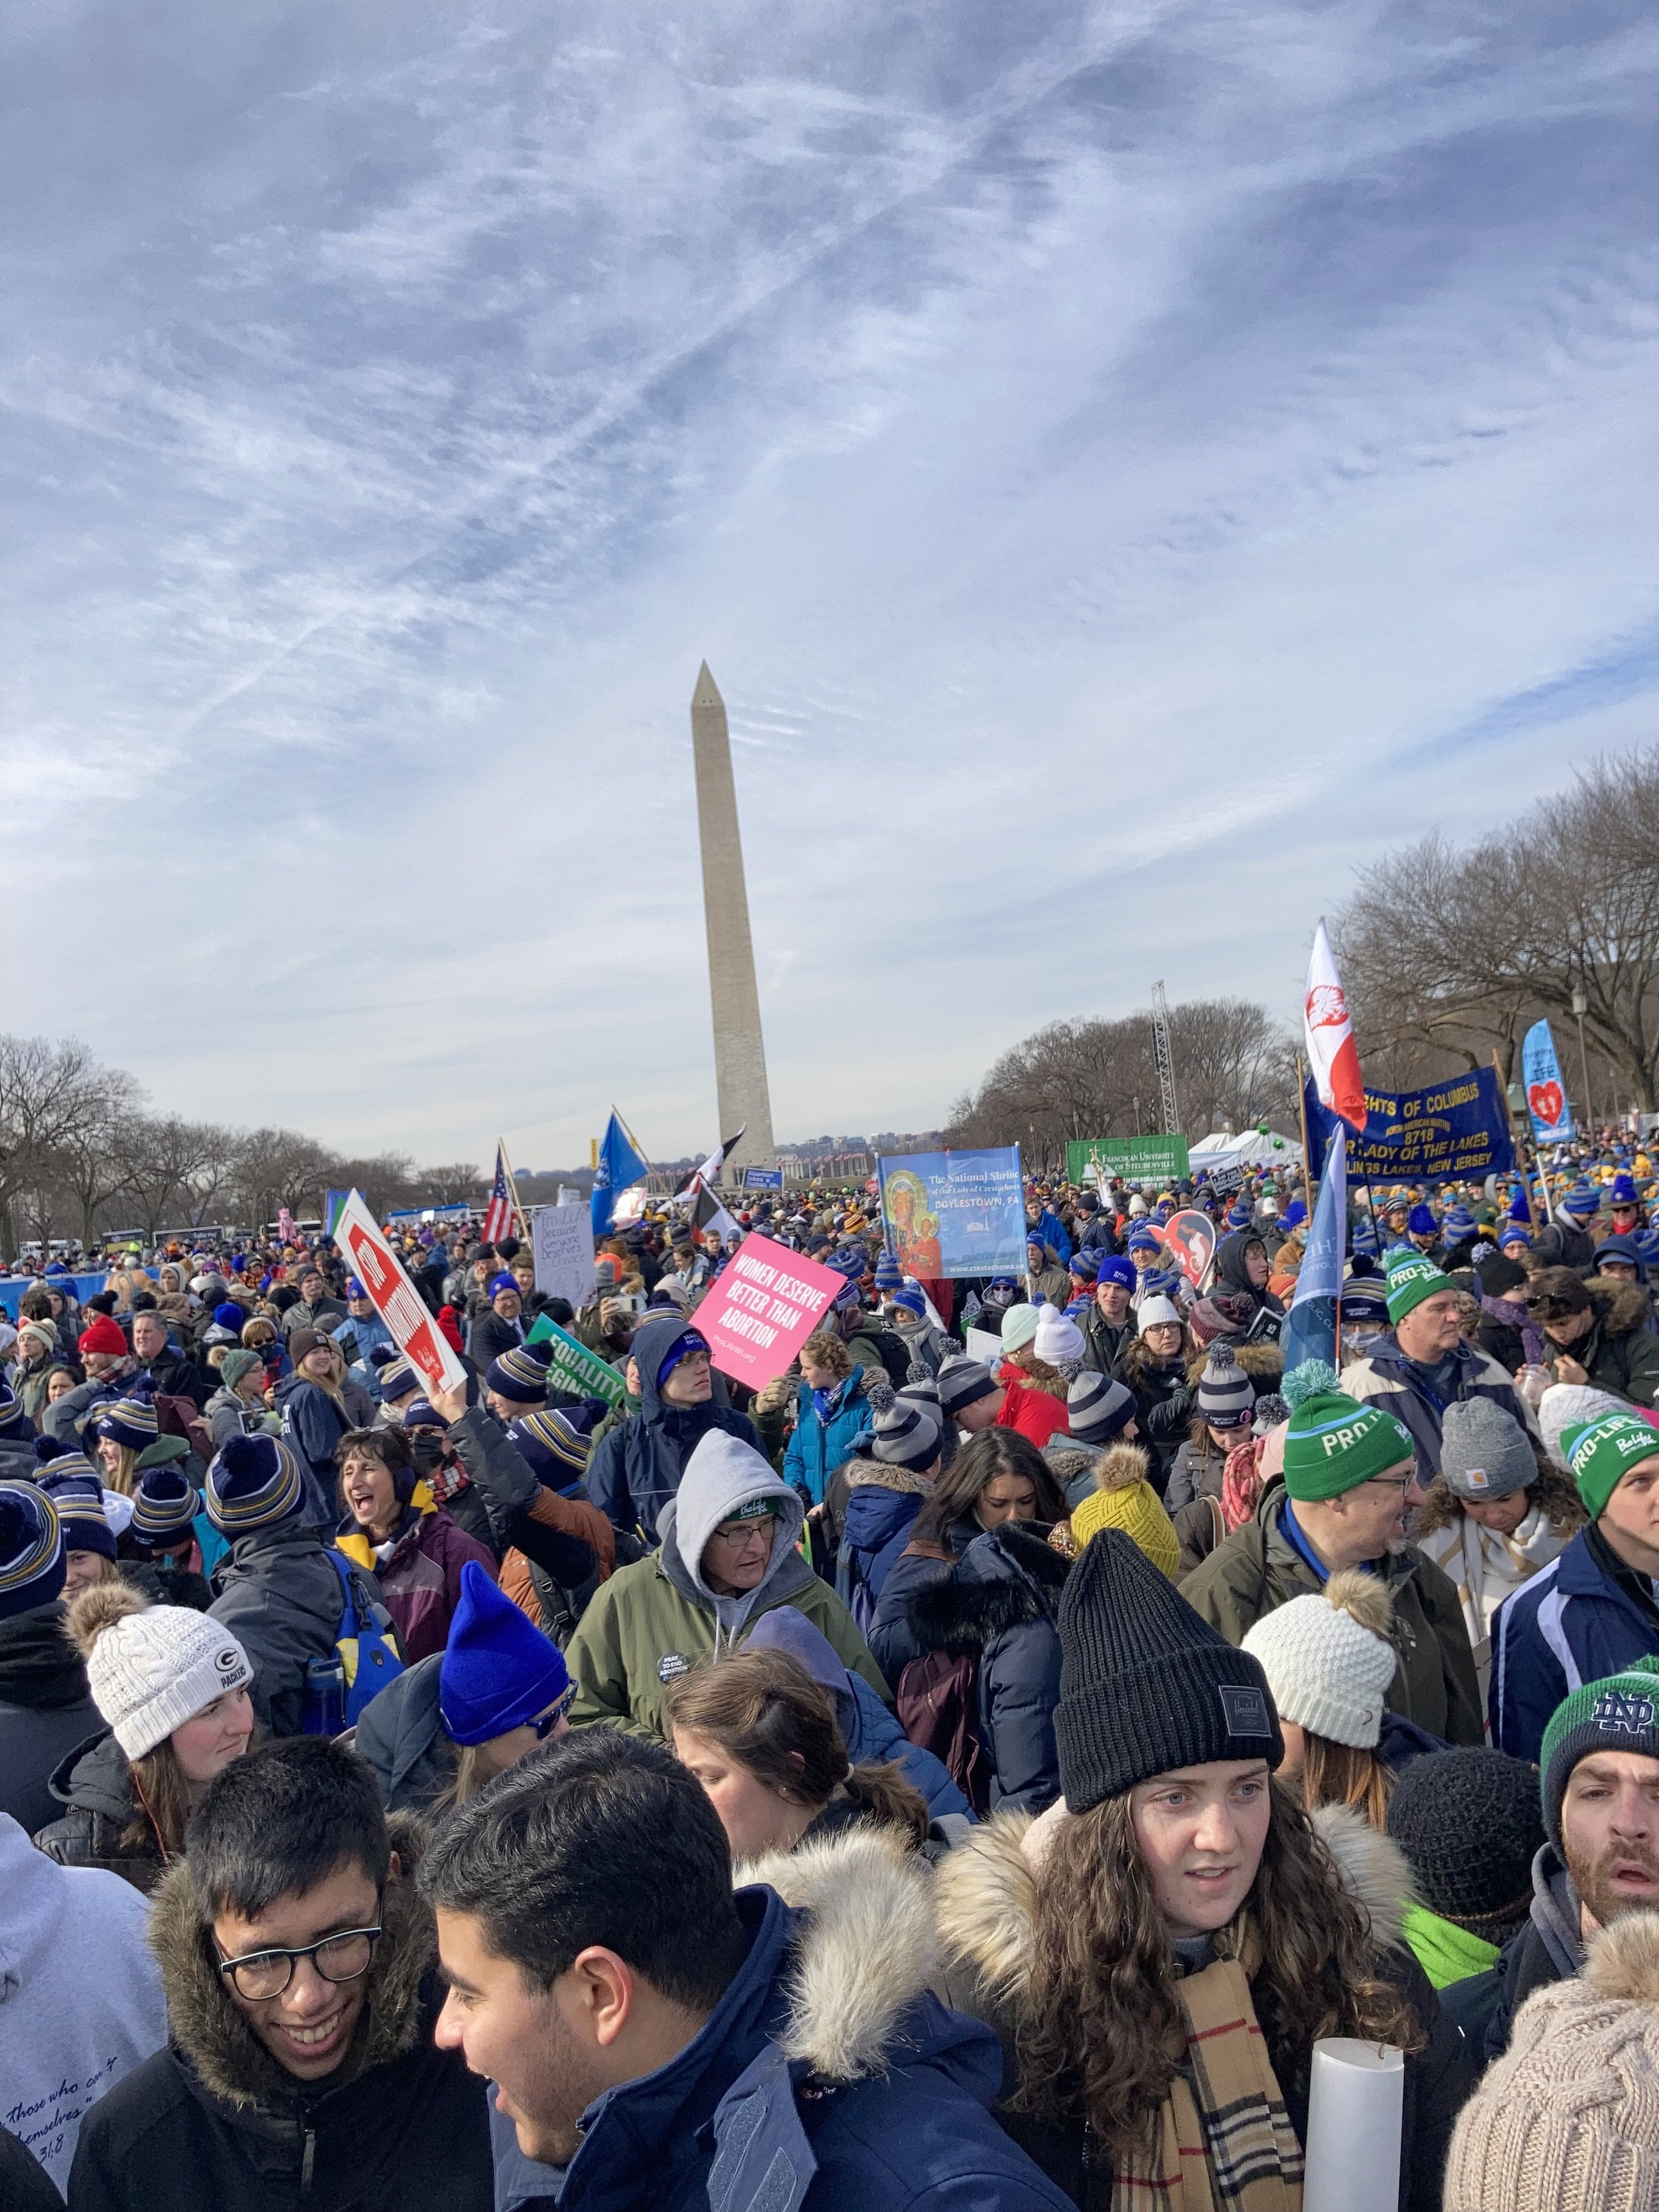 An endless sea of Americans gathered in the National Mall to promote the dignity of life